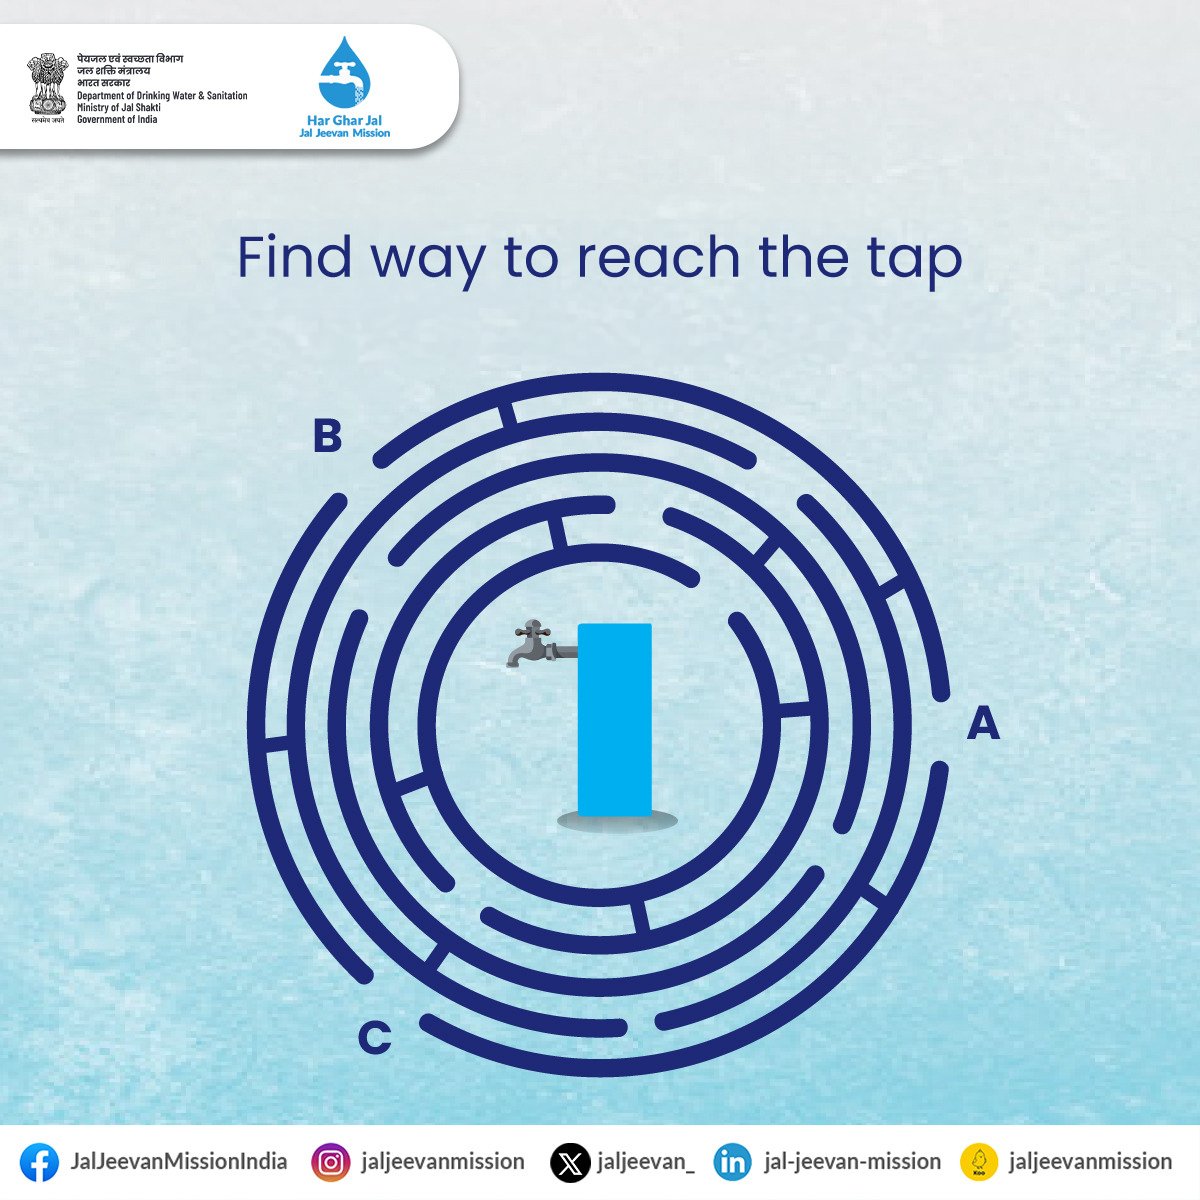 Which way will lead to the tap? Tell us in comments section. #JalJeevanMission #JJM #WATER #UNICEF @HarGharJal @jaljeevan_ @MoJSDDWS @PIB_India @DoWRRDGR_MoJS